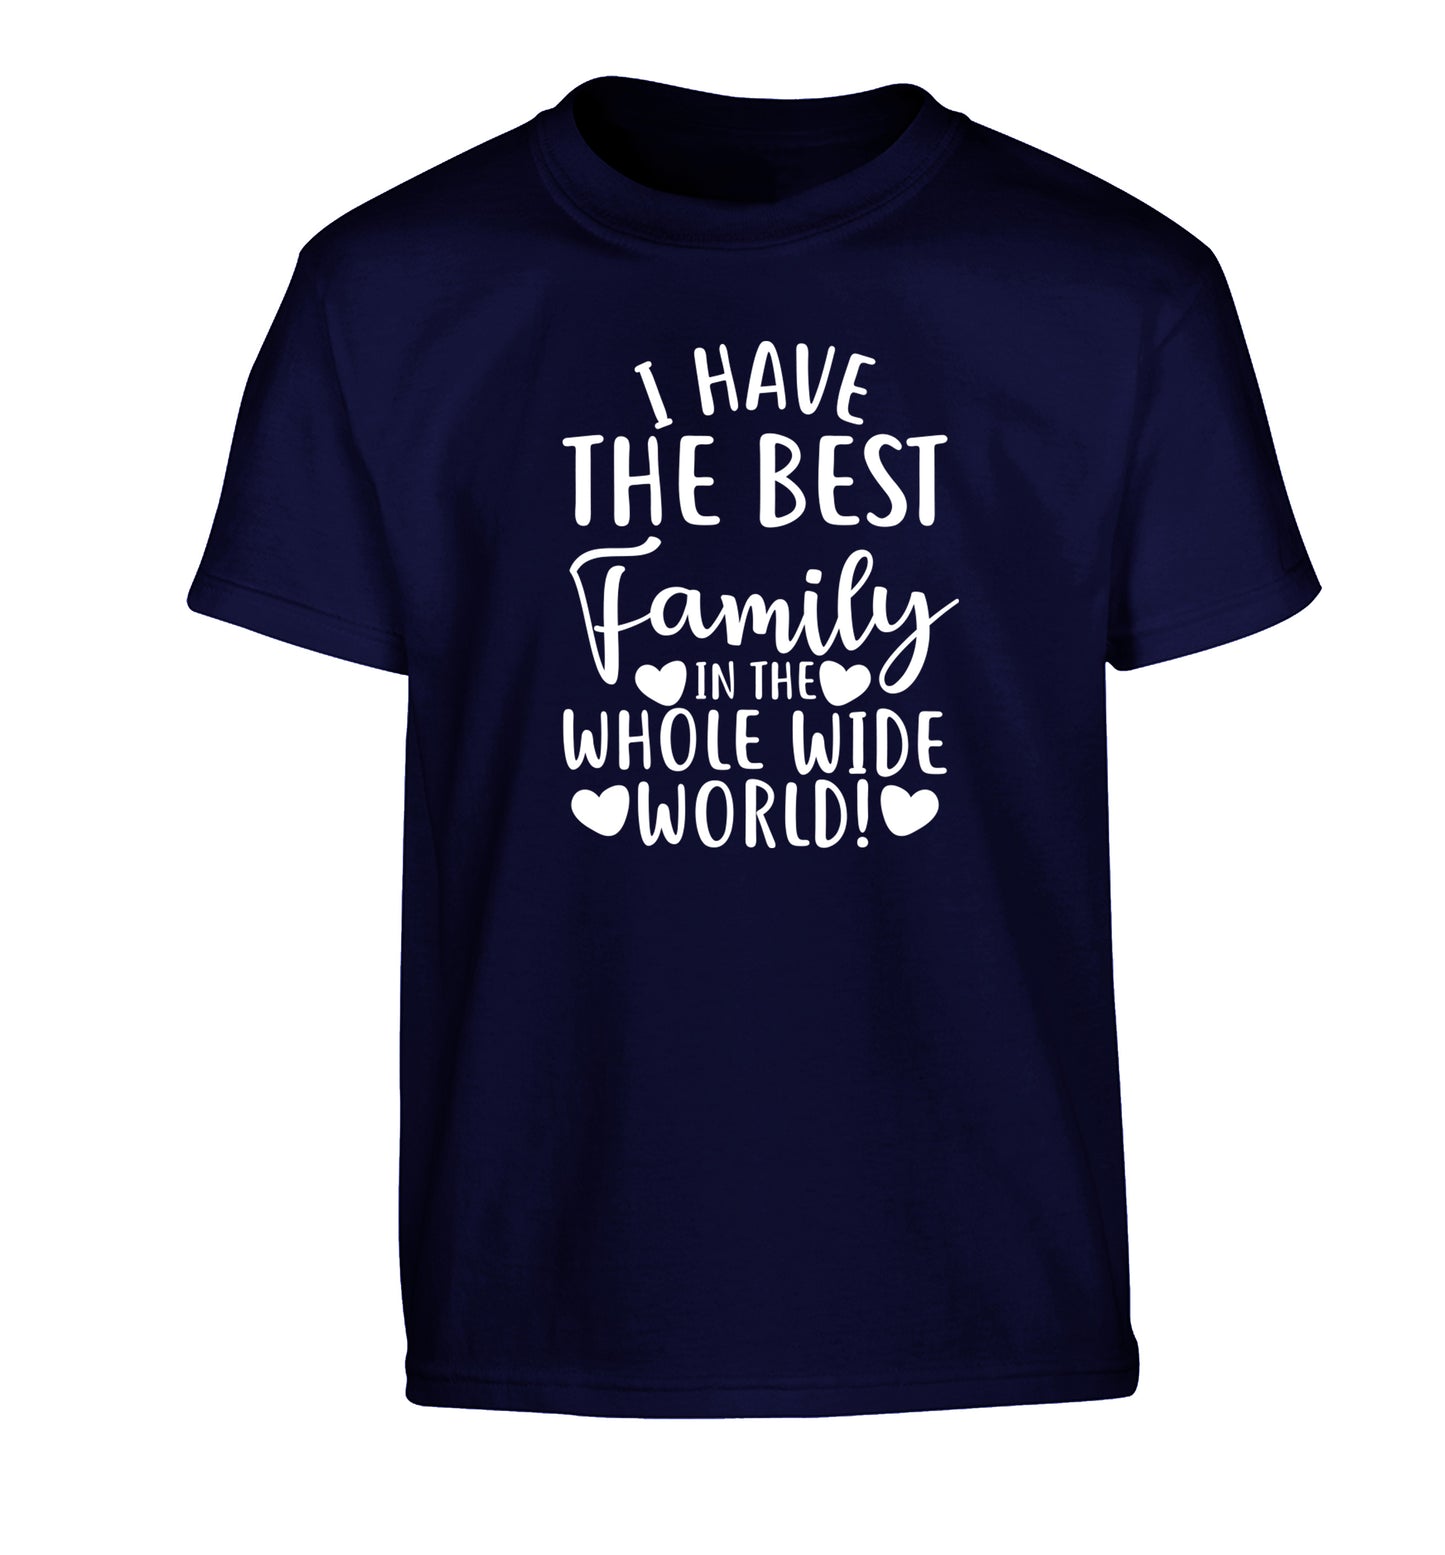 I have the best family in the whole wide world! Children's navy Tshirt 12-13 Years